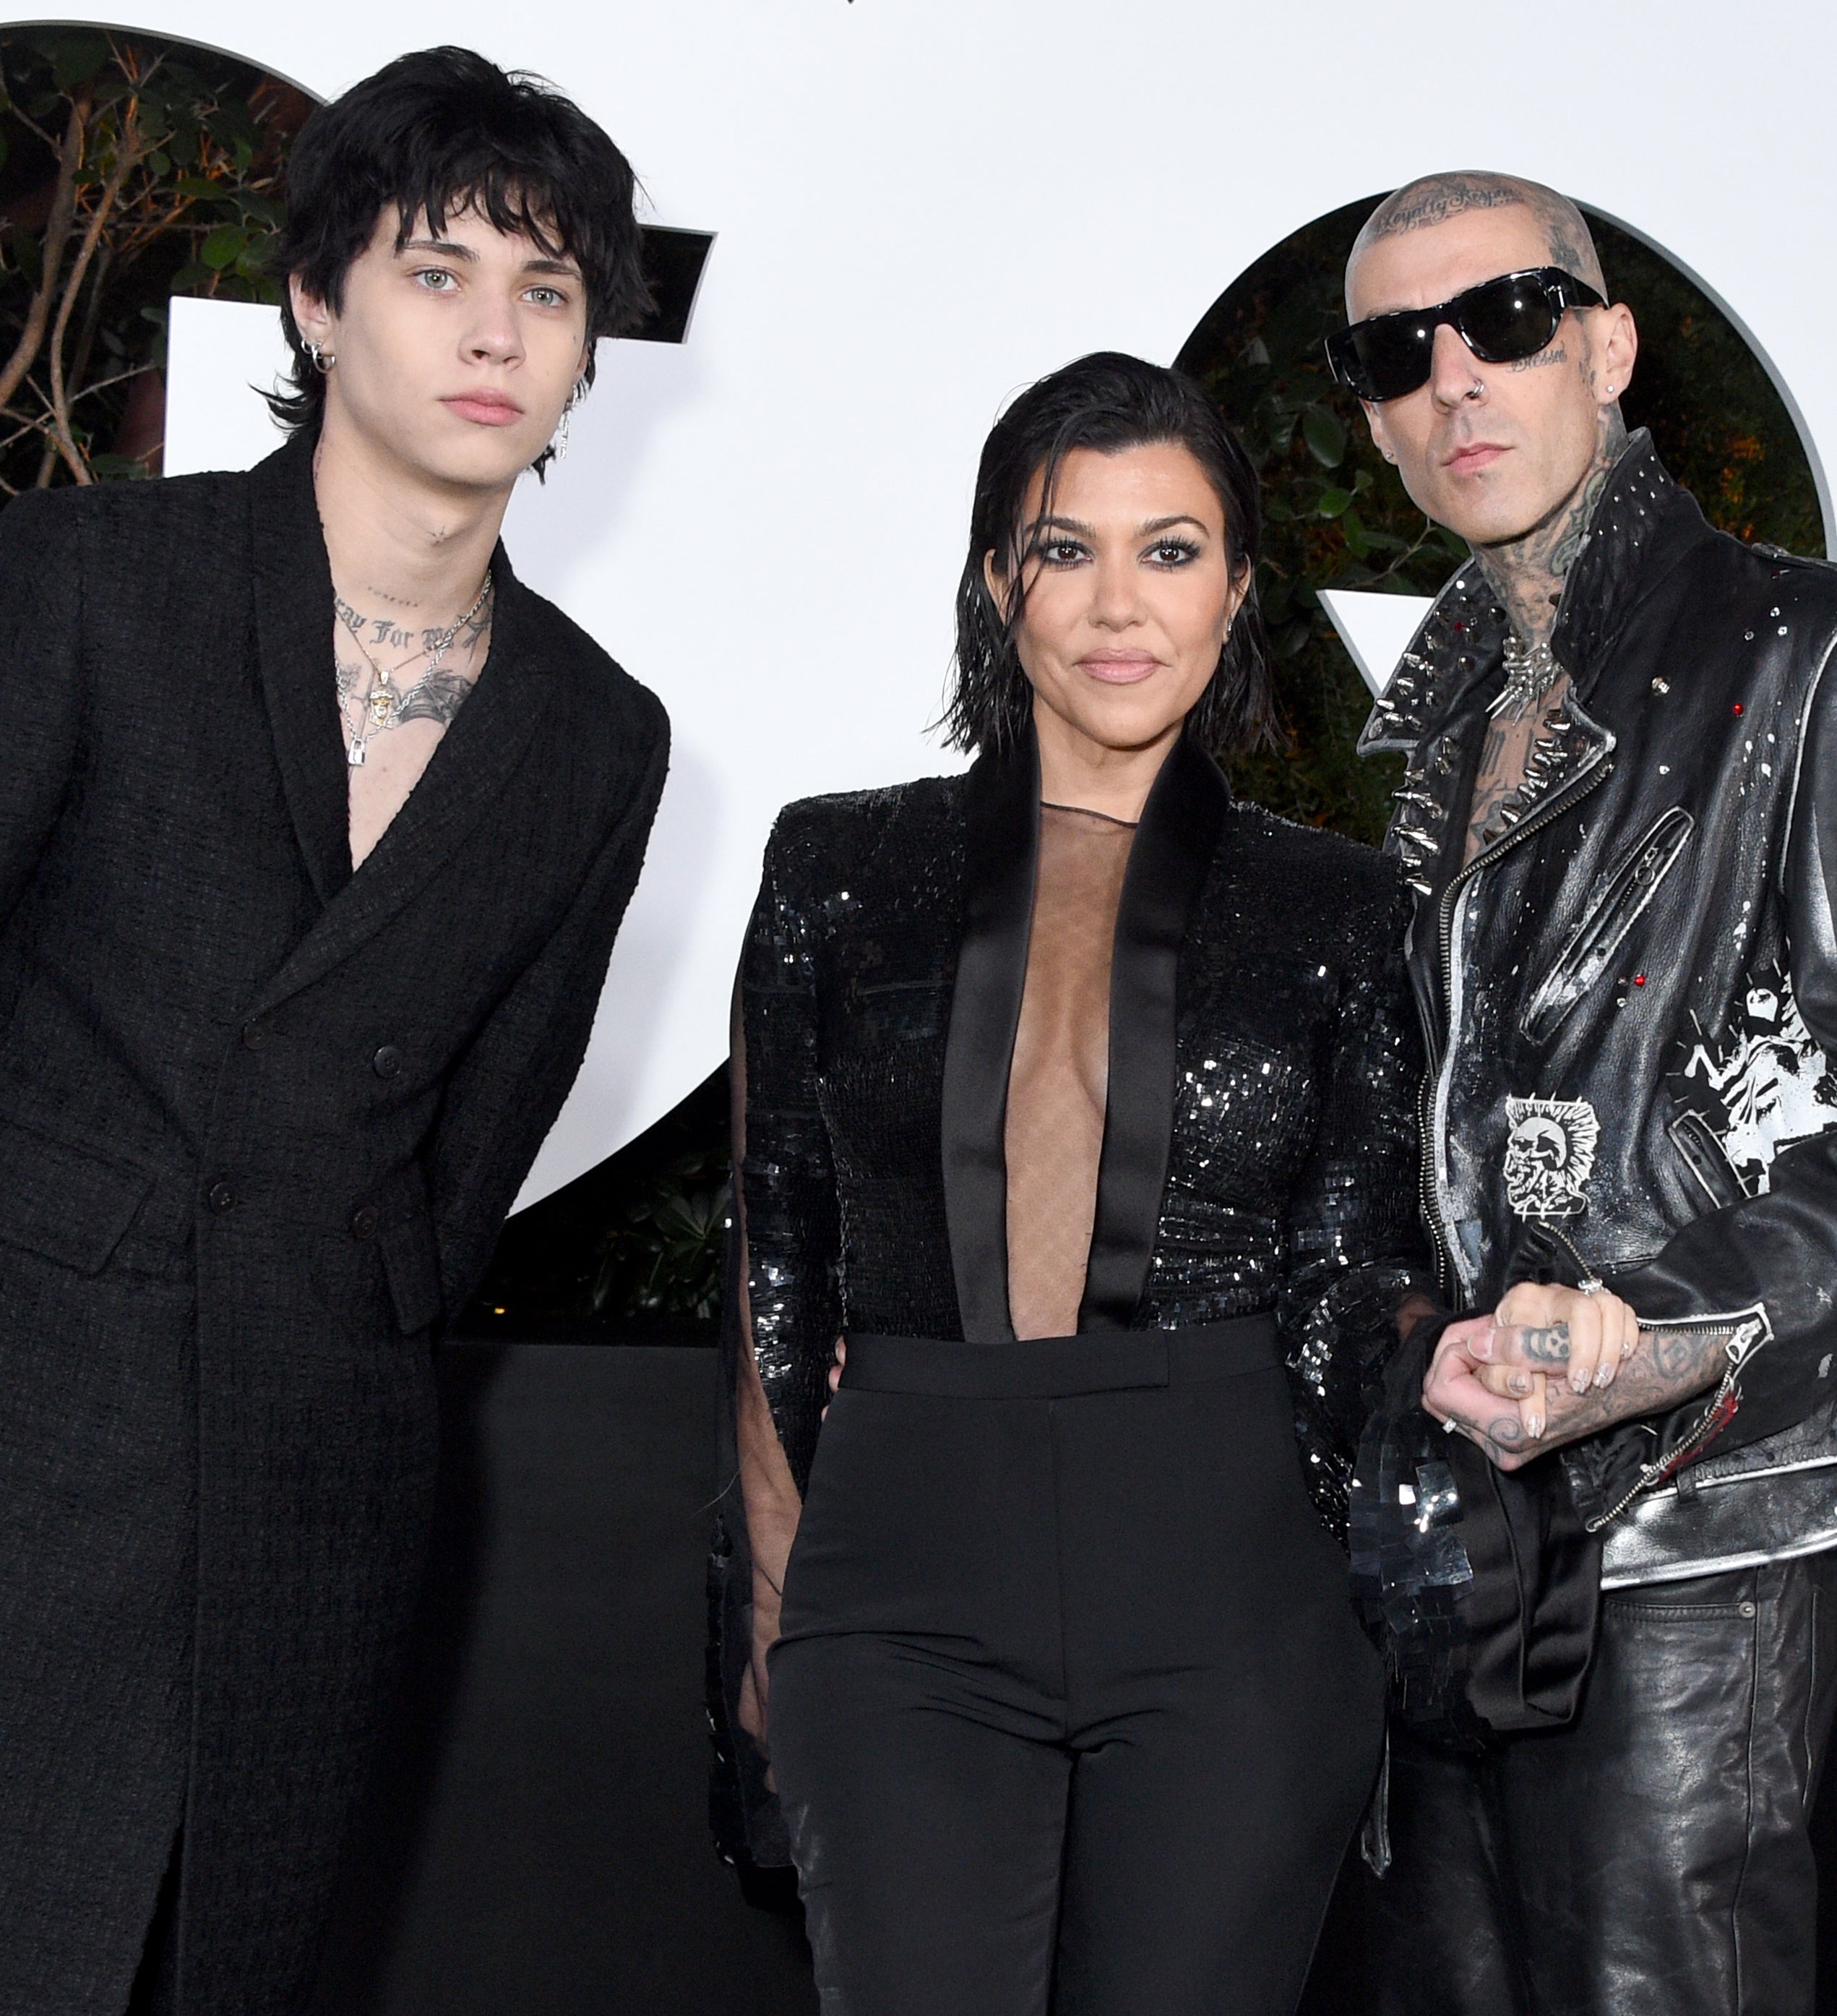 From left to right: Landon, Kourtney, and Travis at a media event